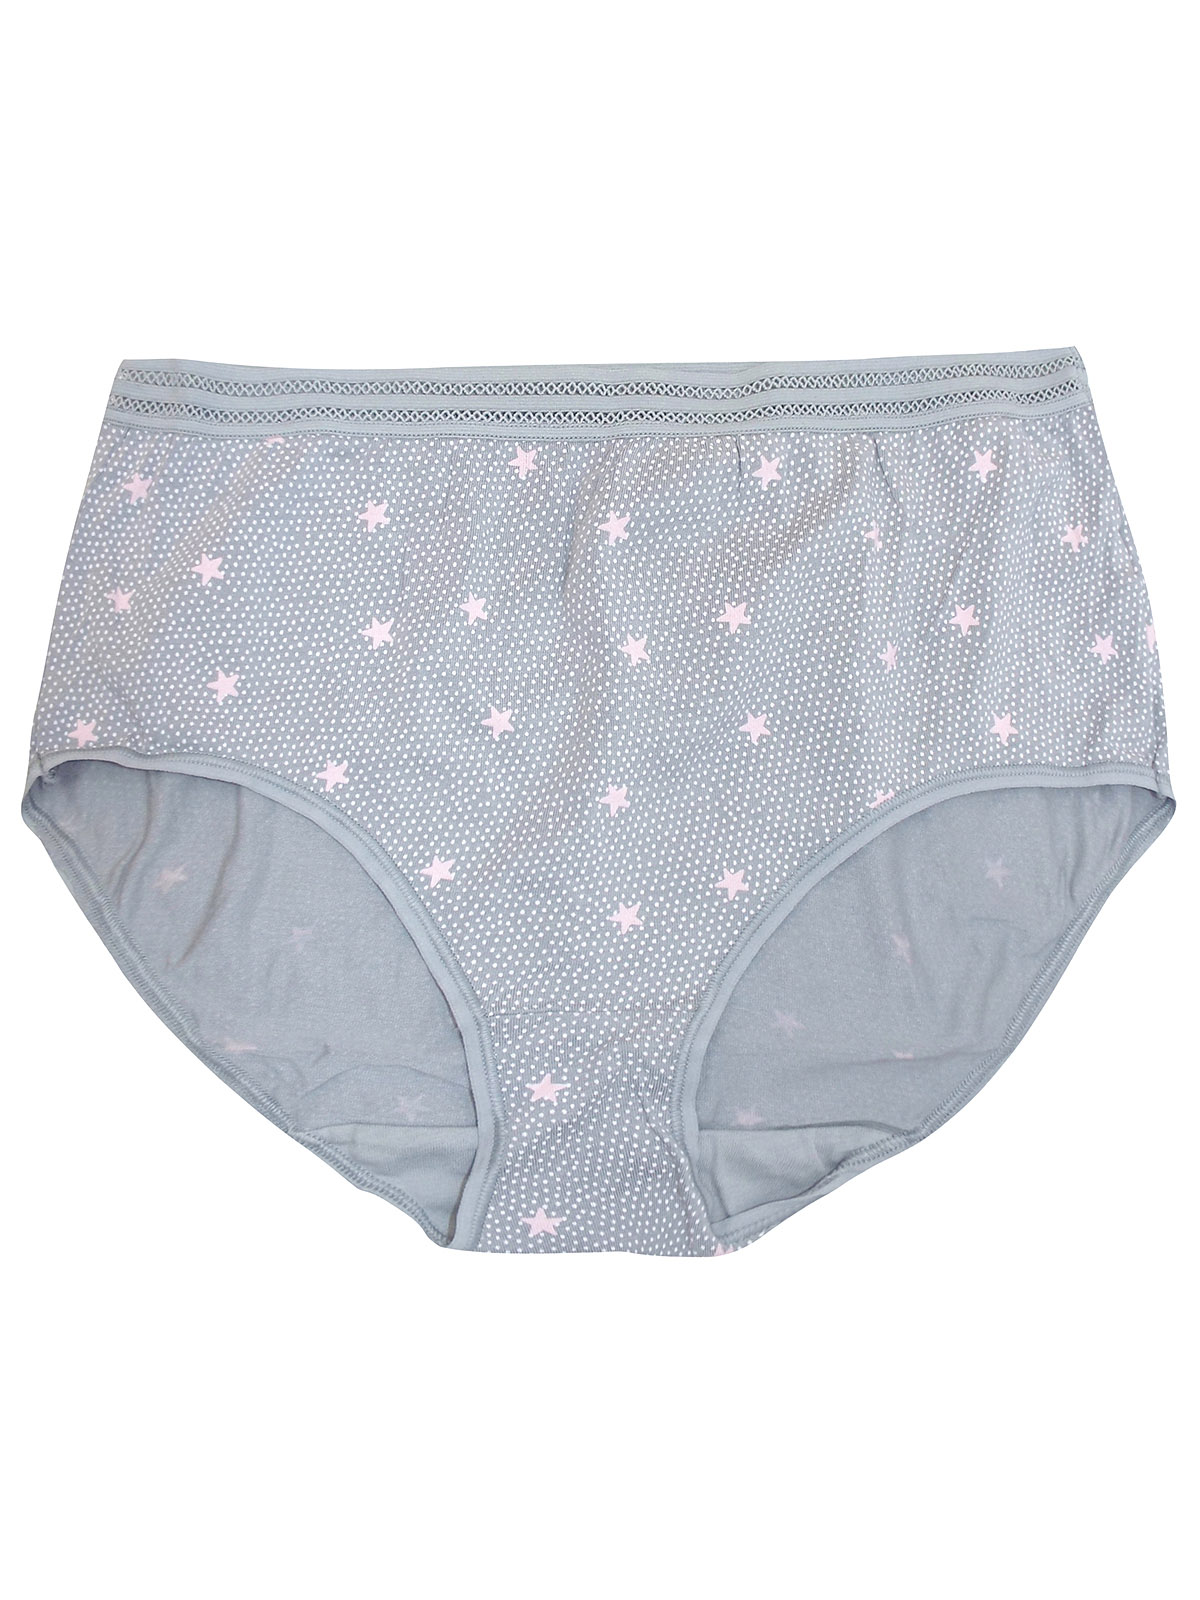 Marks and Spencer - - M&5 GREY Modal Blend Star Print Midi Knickers ...